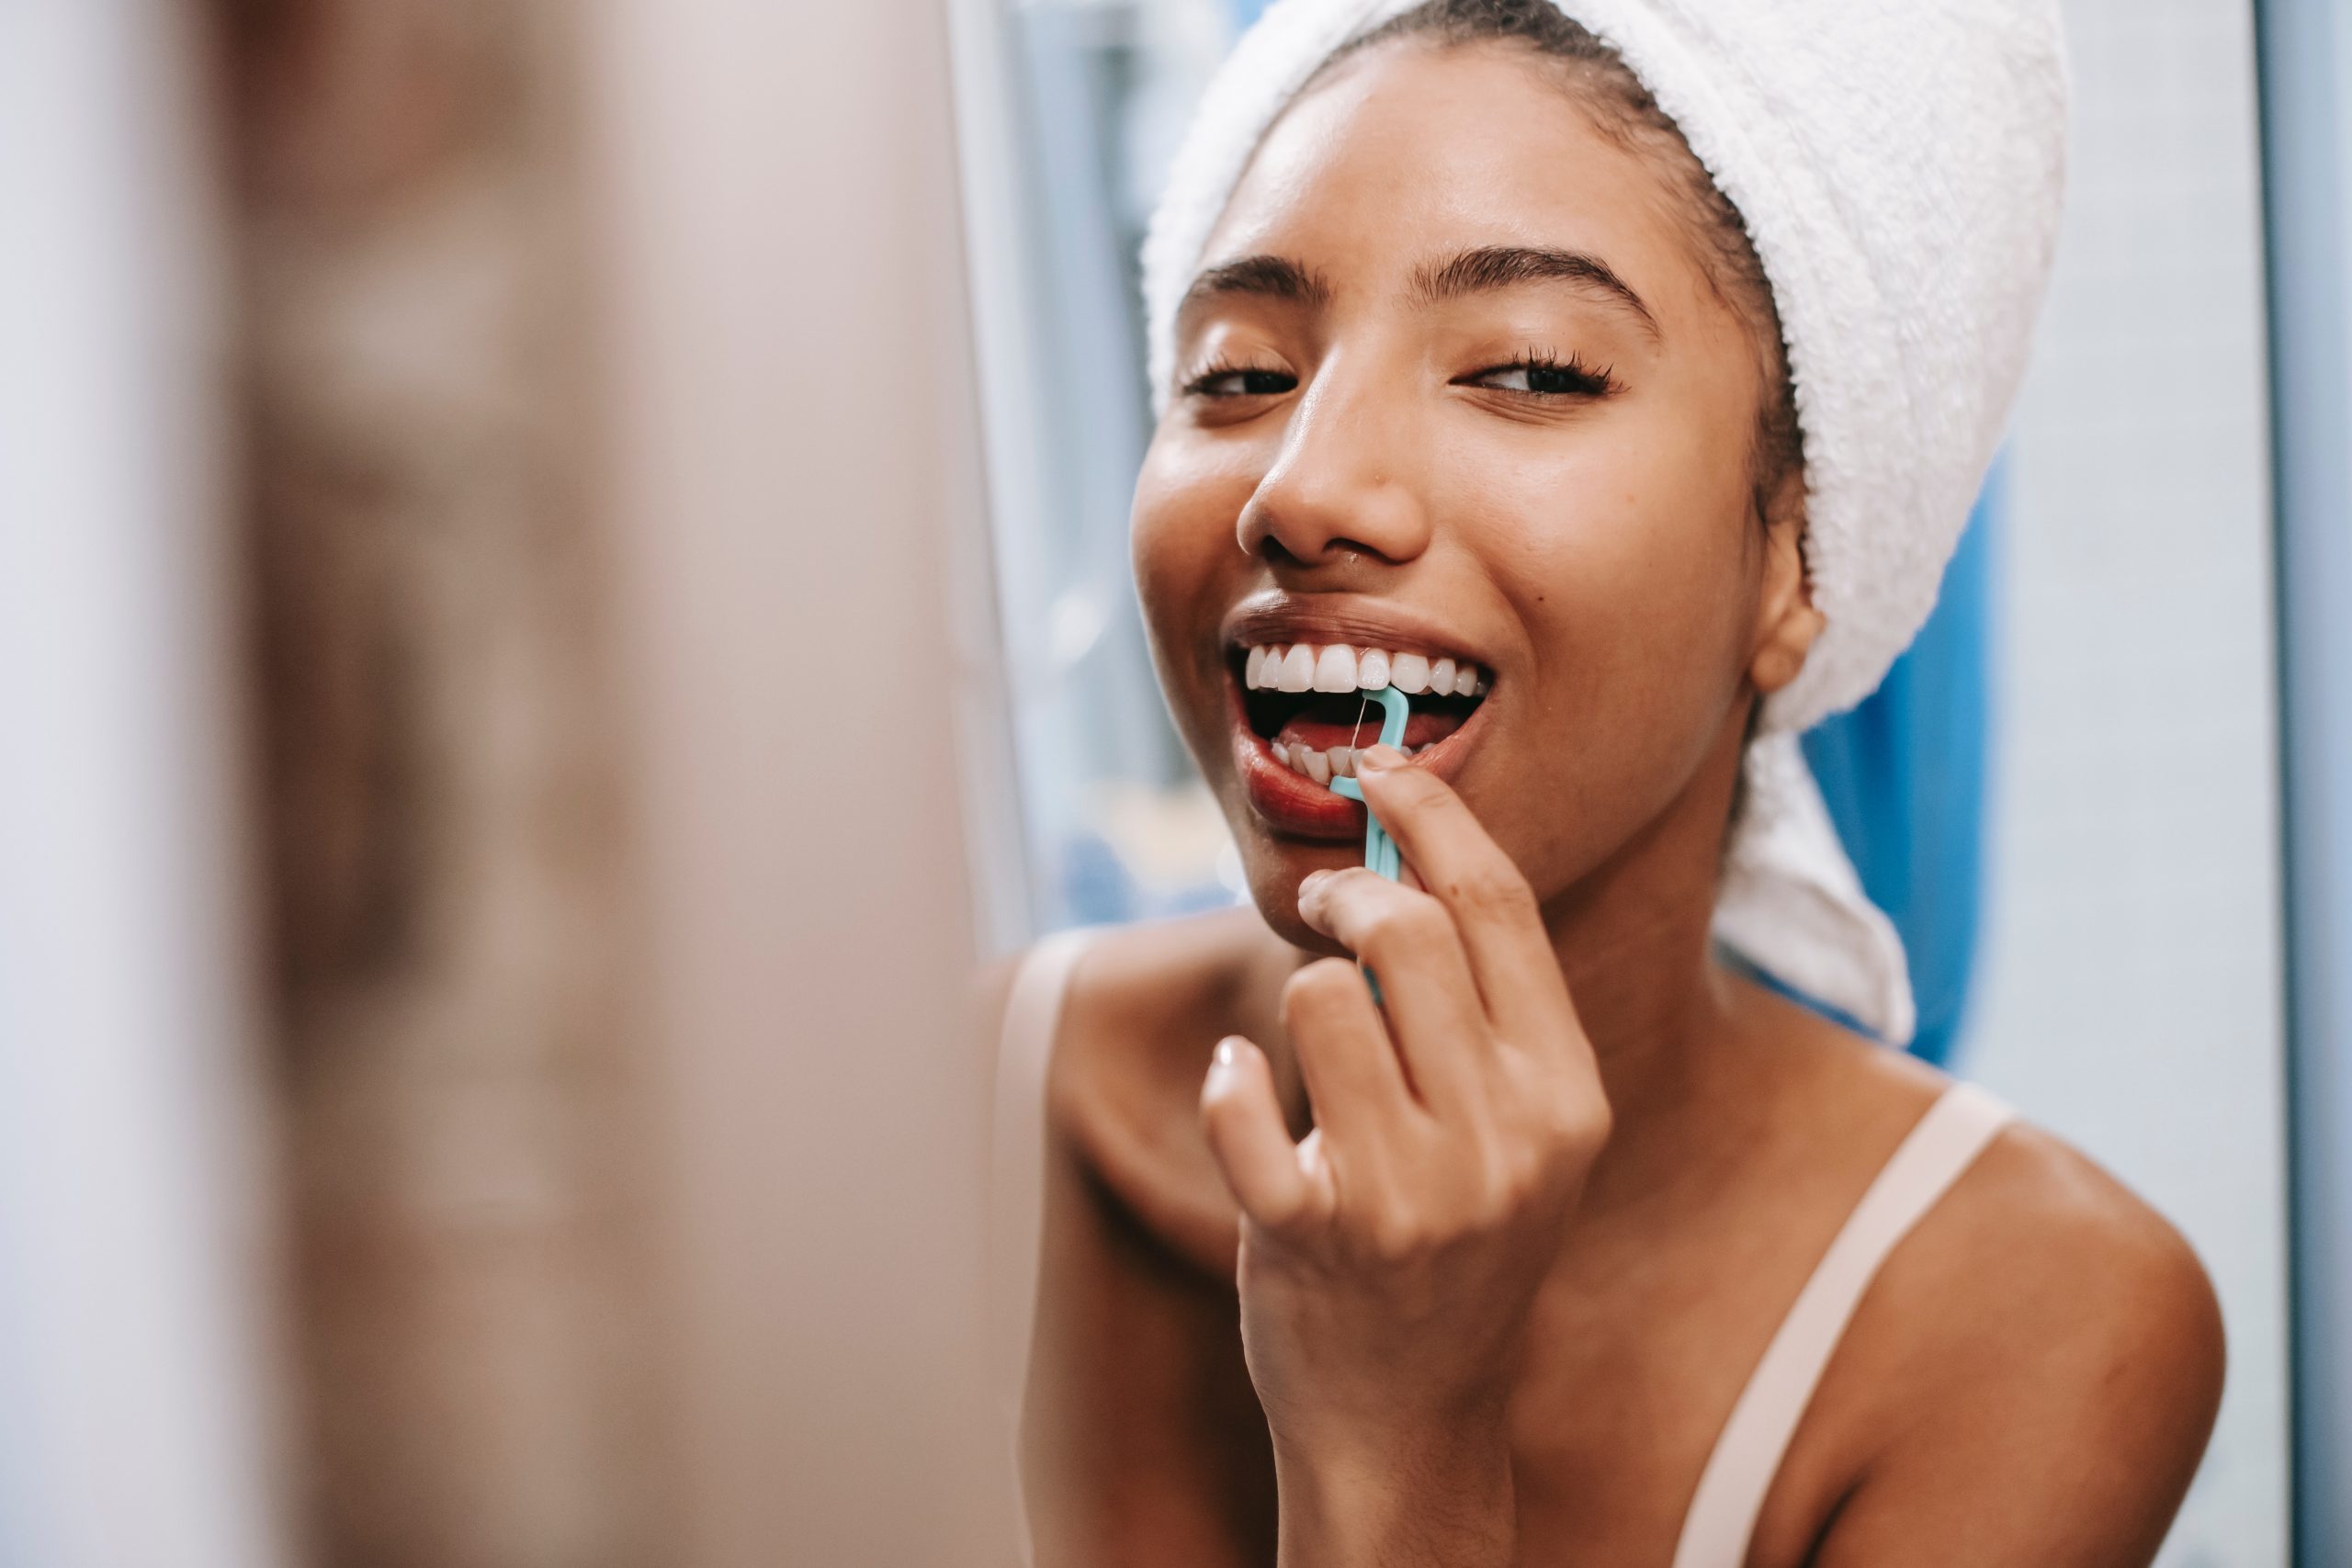 Why Flossing is Important and Why People Don't Do It, according to dentists